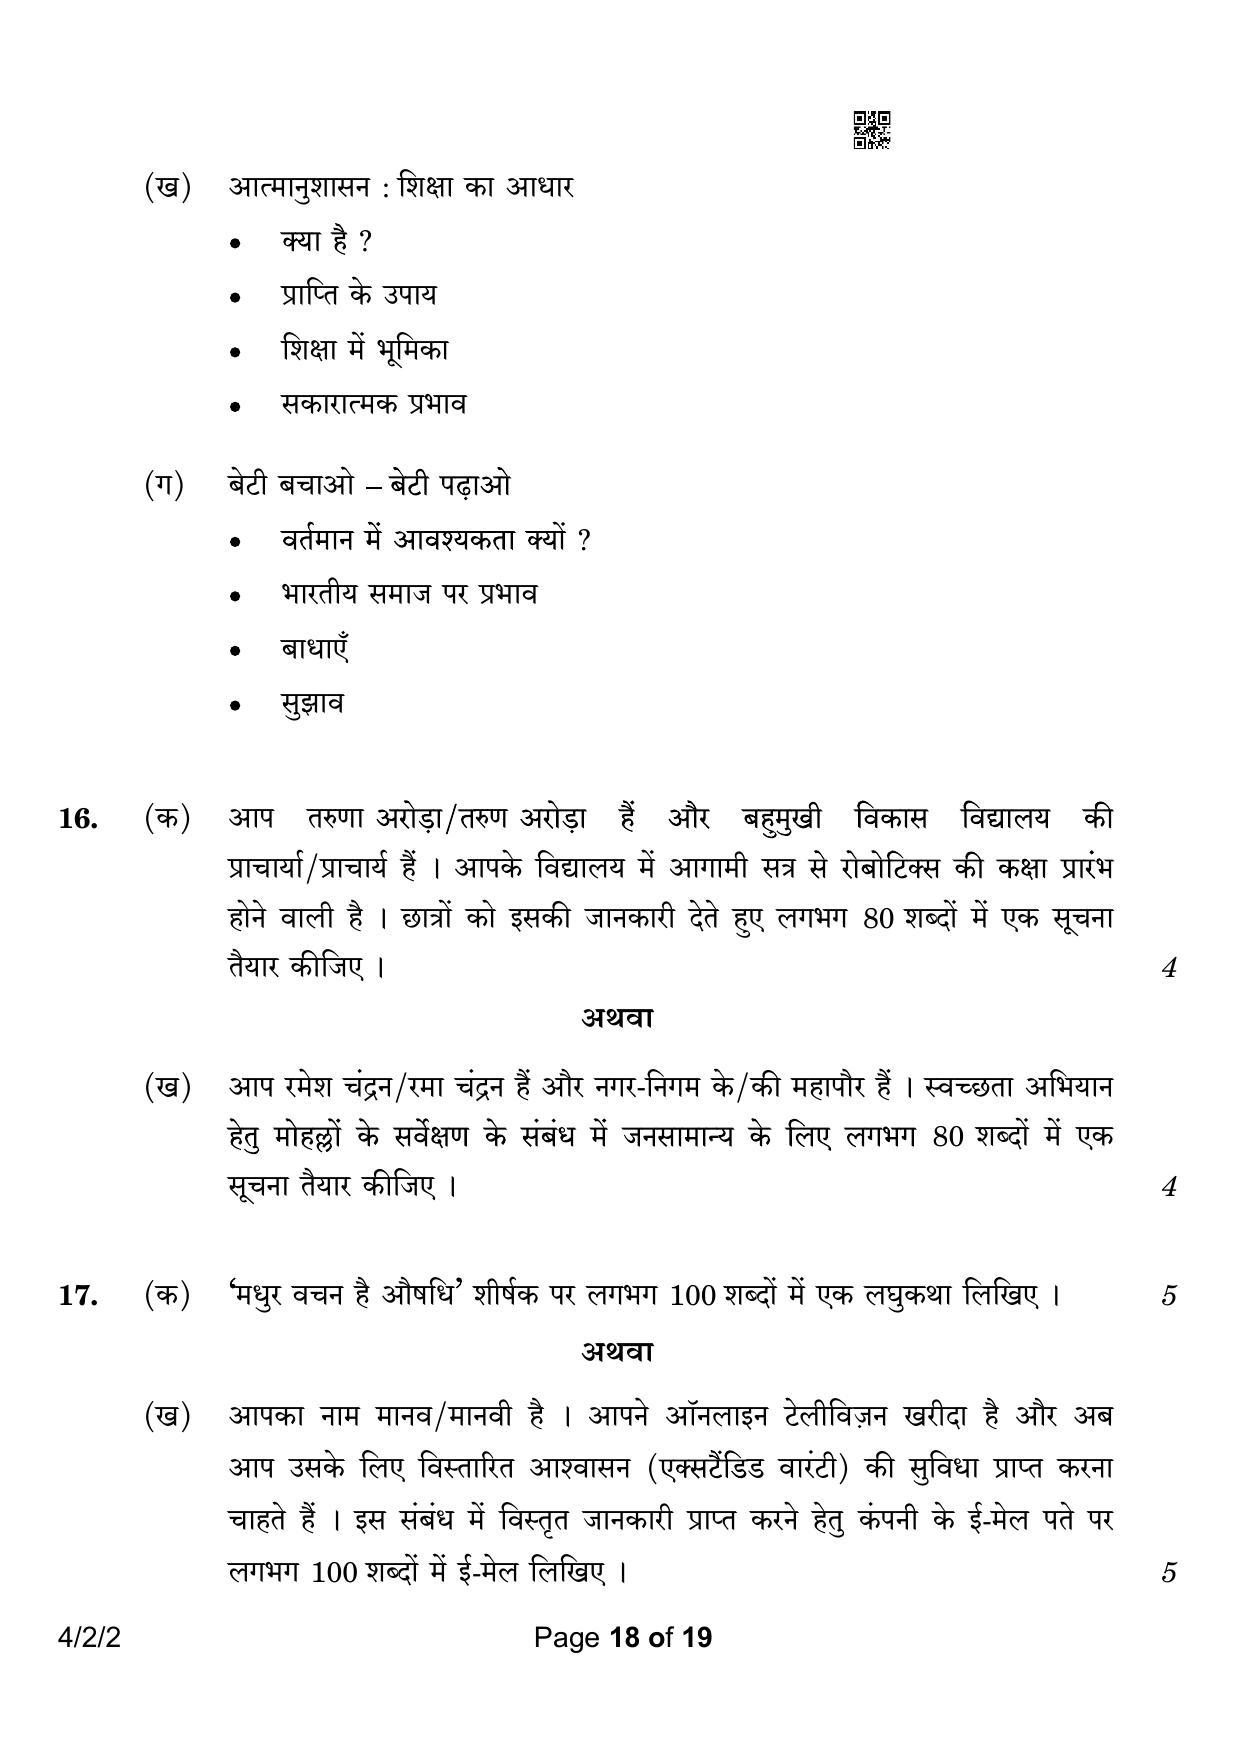 CBSE Class 10 4-2-2 Hindi B 2023 Question Paper - Page 18